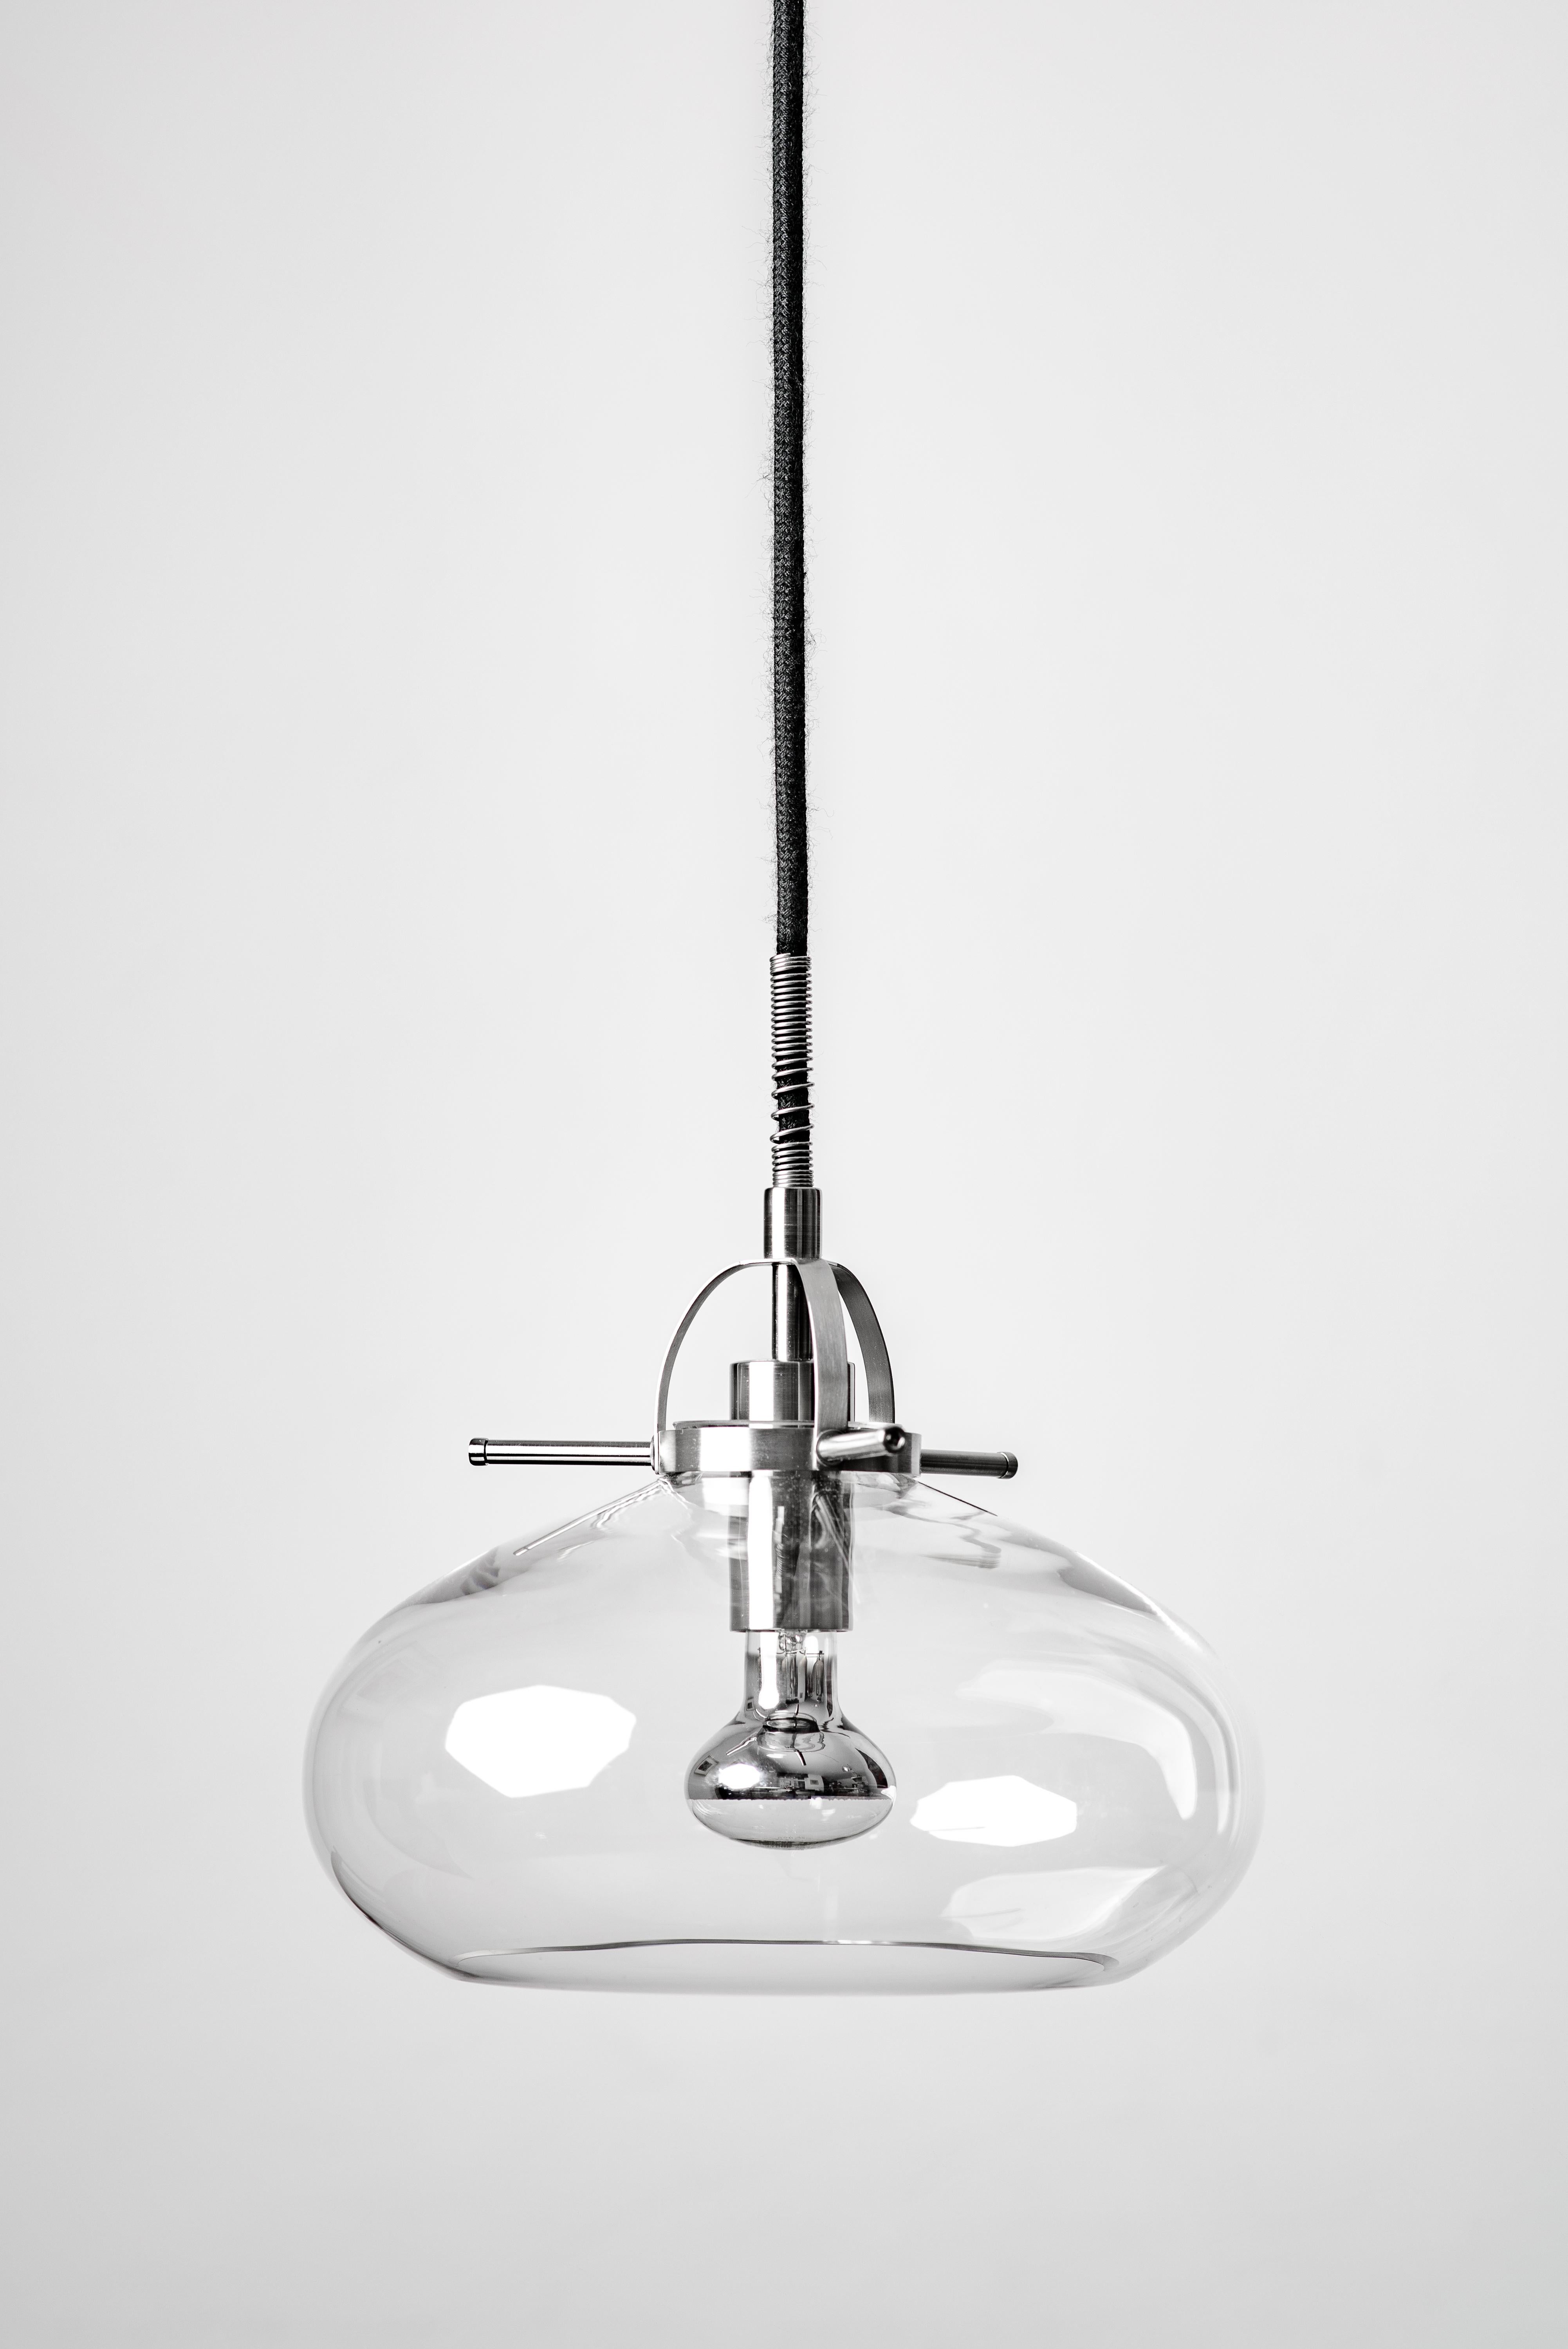 Polish Modern Art Deco Inspired Pendant Lamp with Glass Shade For Sale